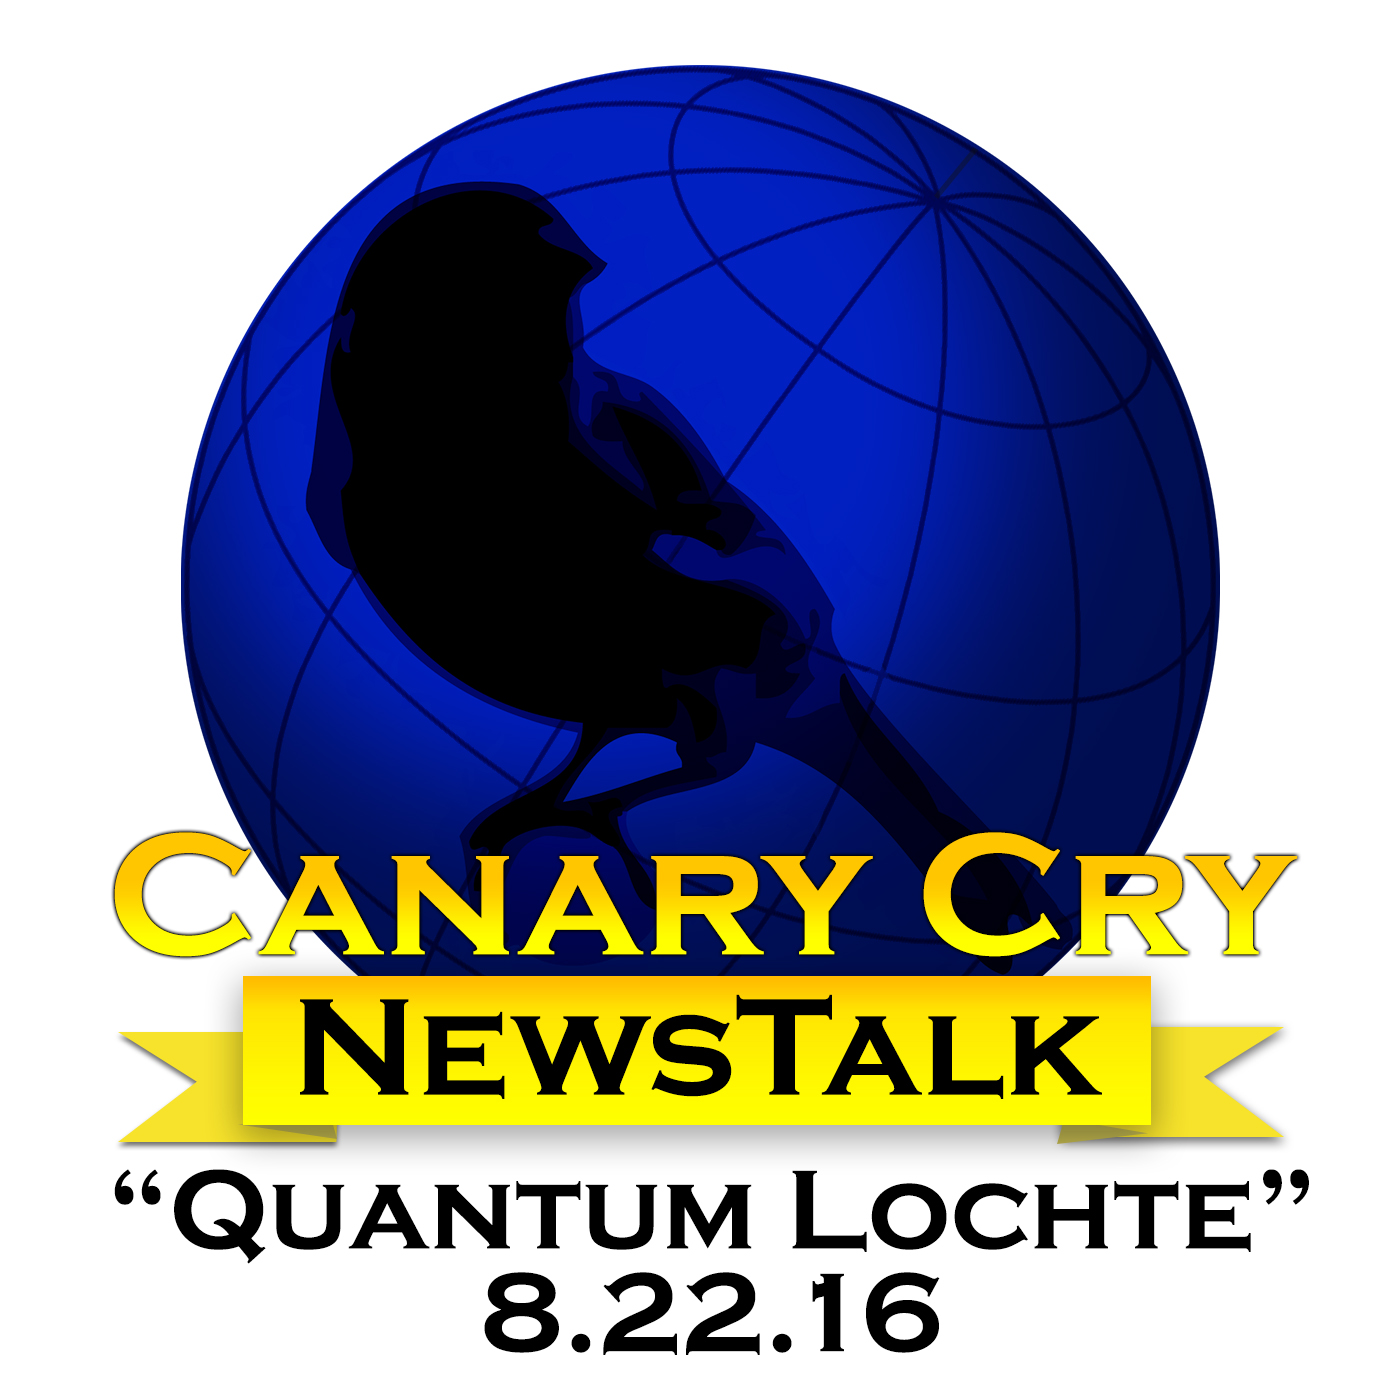 CCR *Special* : Canary Cry News Talk “Quantum Lochte” – 8.22.2016